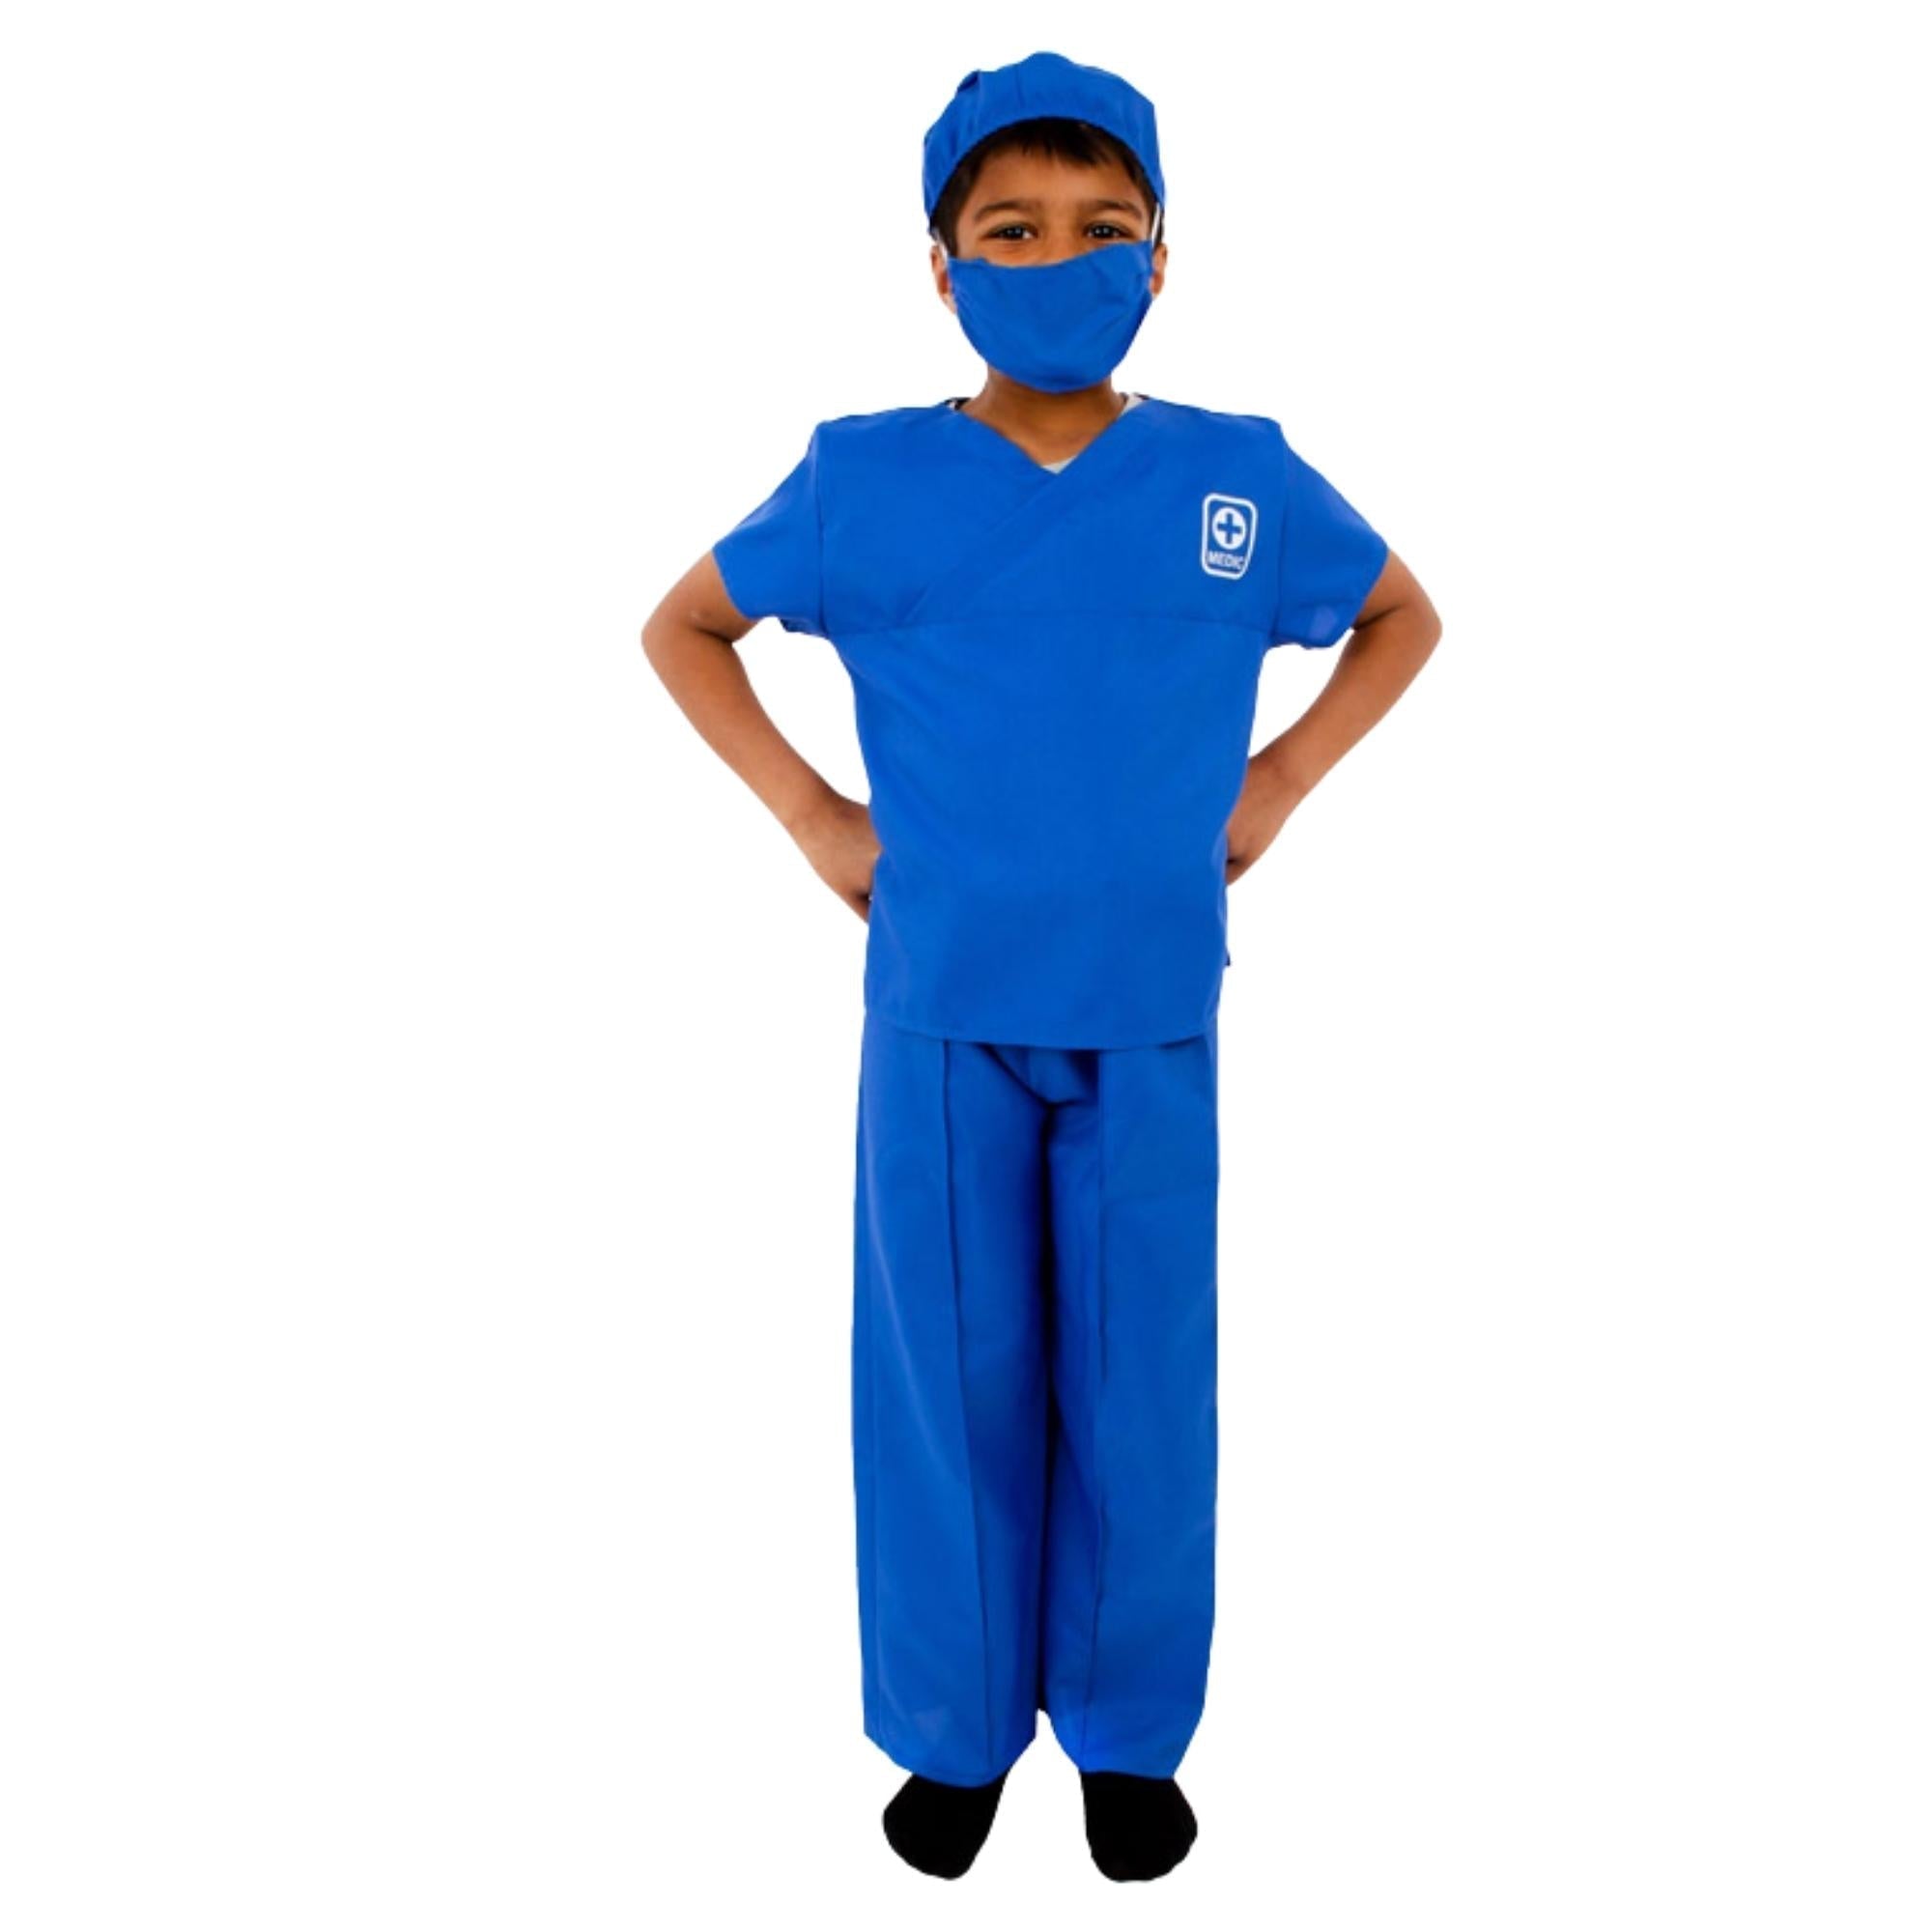 Children's Medic Costume - 5-7 Years, This Children's Medic Costume comprises: polyester, "bi-stretch" elasticated trousers, tunic top with print and one-piece cap and mask. Encourage role play with this realistic, modern dressing up costume. They'll always be on call with this premium and immersive children's surgical medic costume! This very tactile outfit is constructed with authenticity and fun in mind. Let them get caught up in the moment of role play thanks to detailing such as the realistic cutaway s